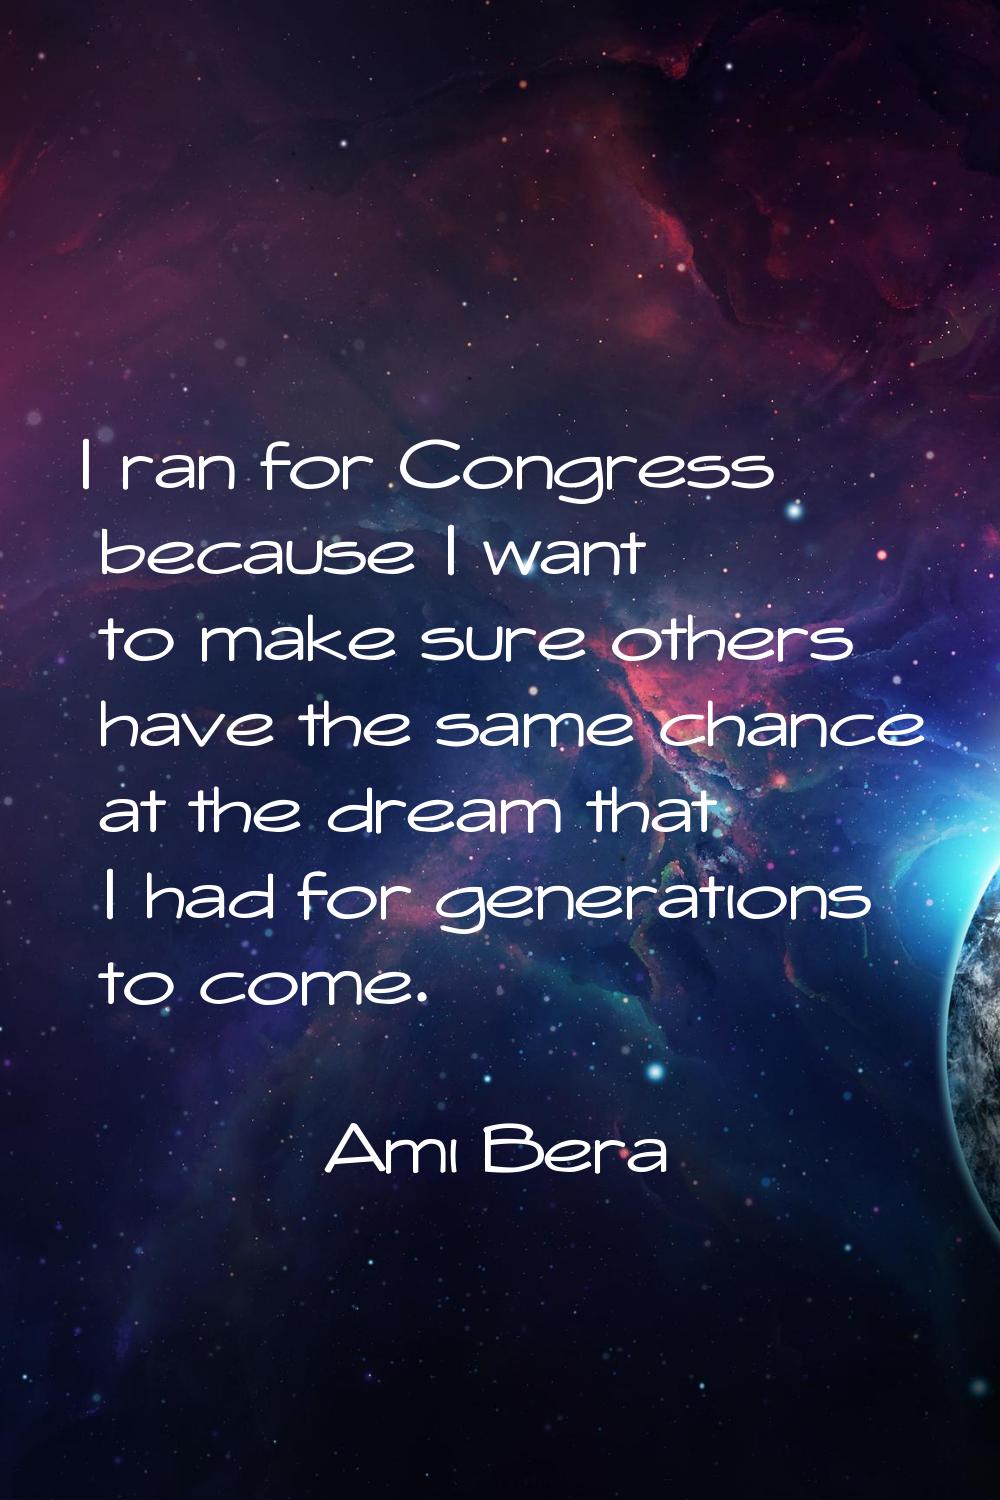 I ran for Congress because I want to make sure others have the same chance at the dream that I had 